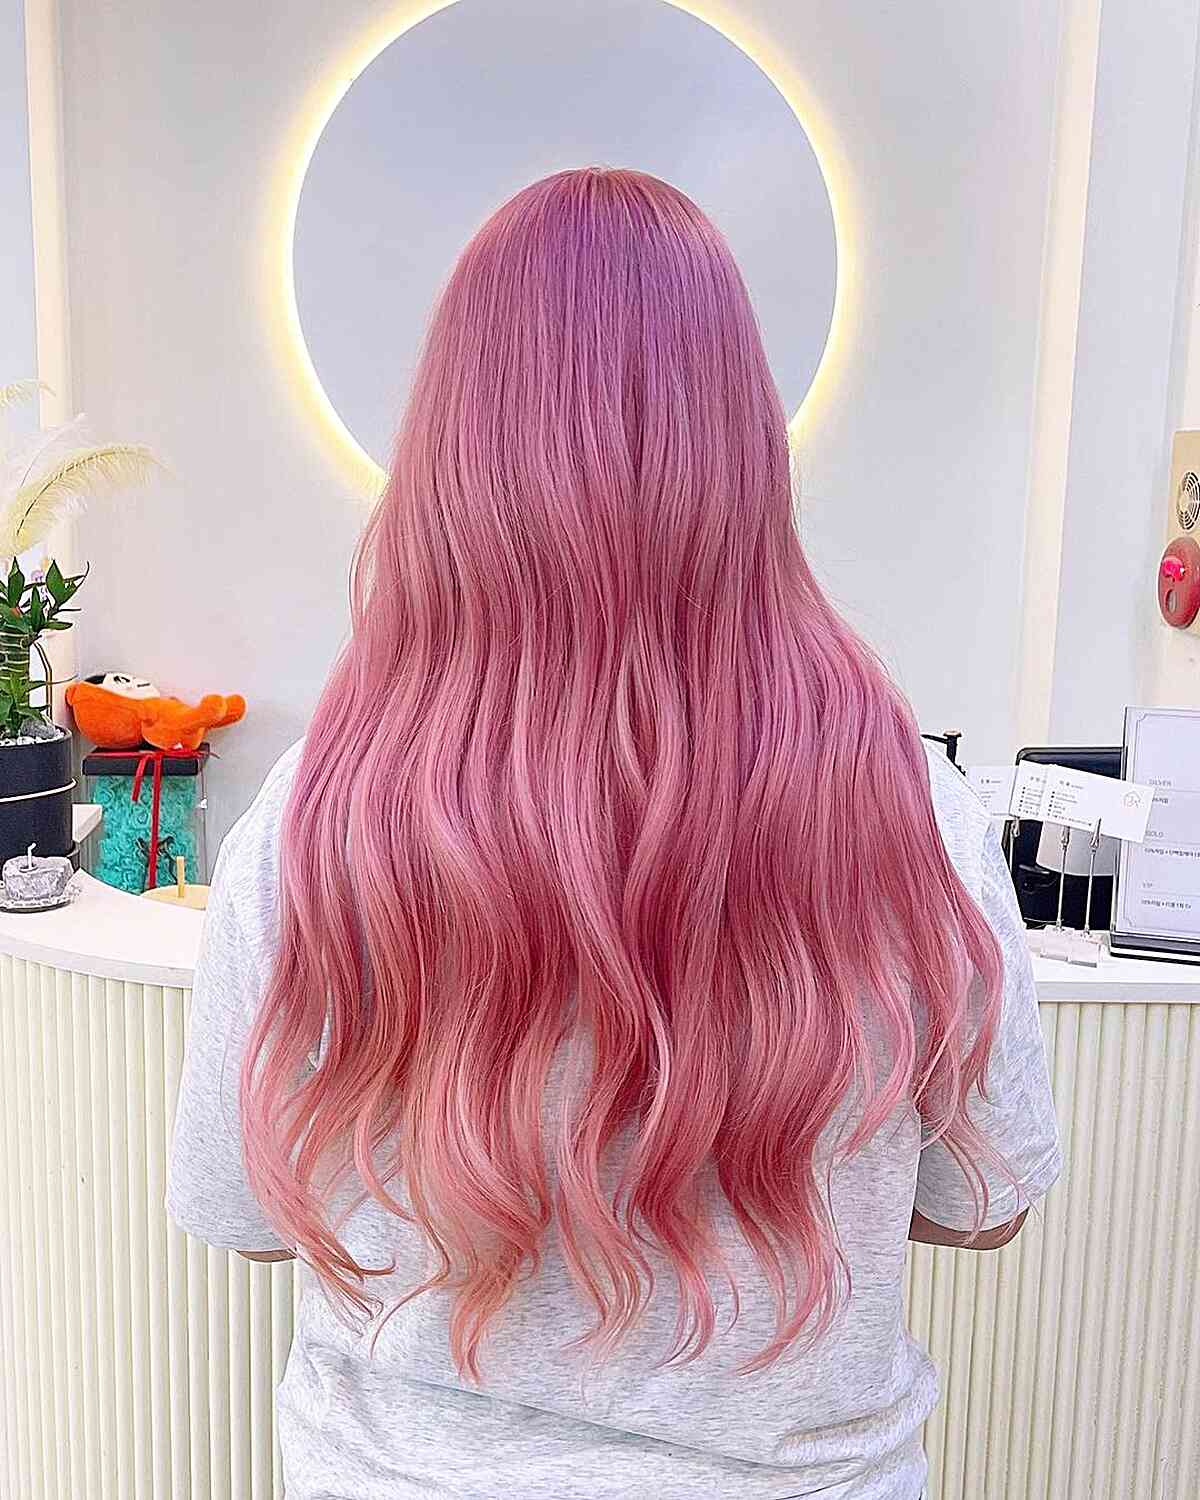 Long Pink Tresses with lived-in waves